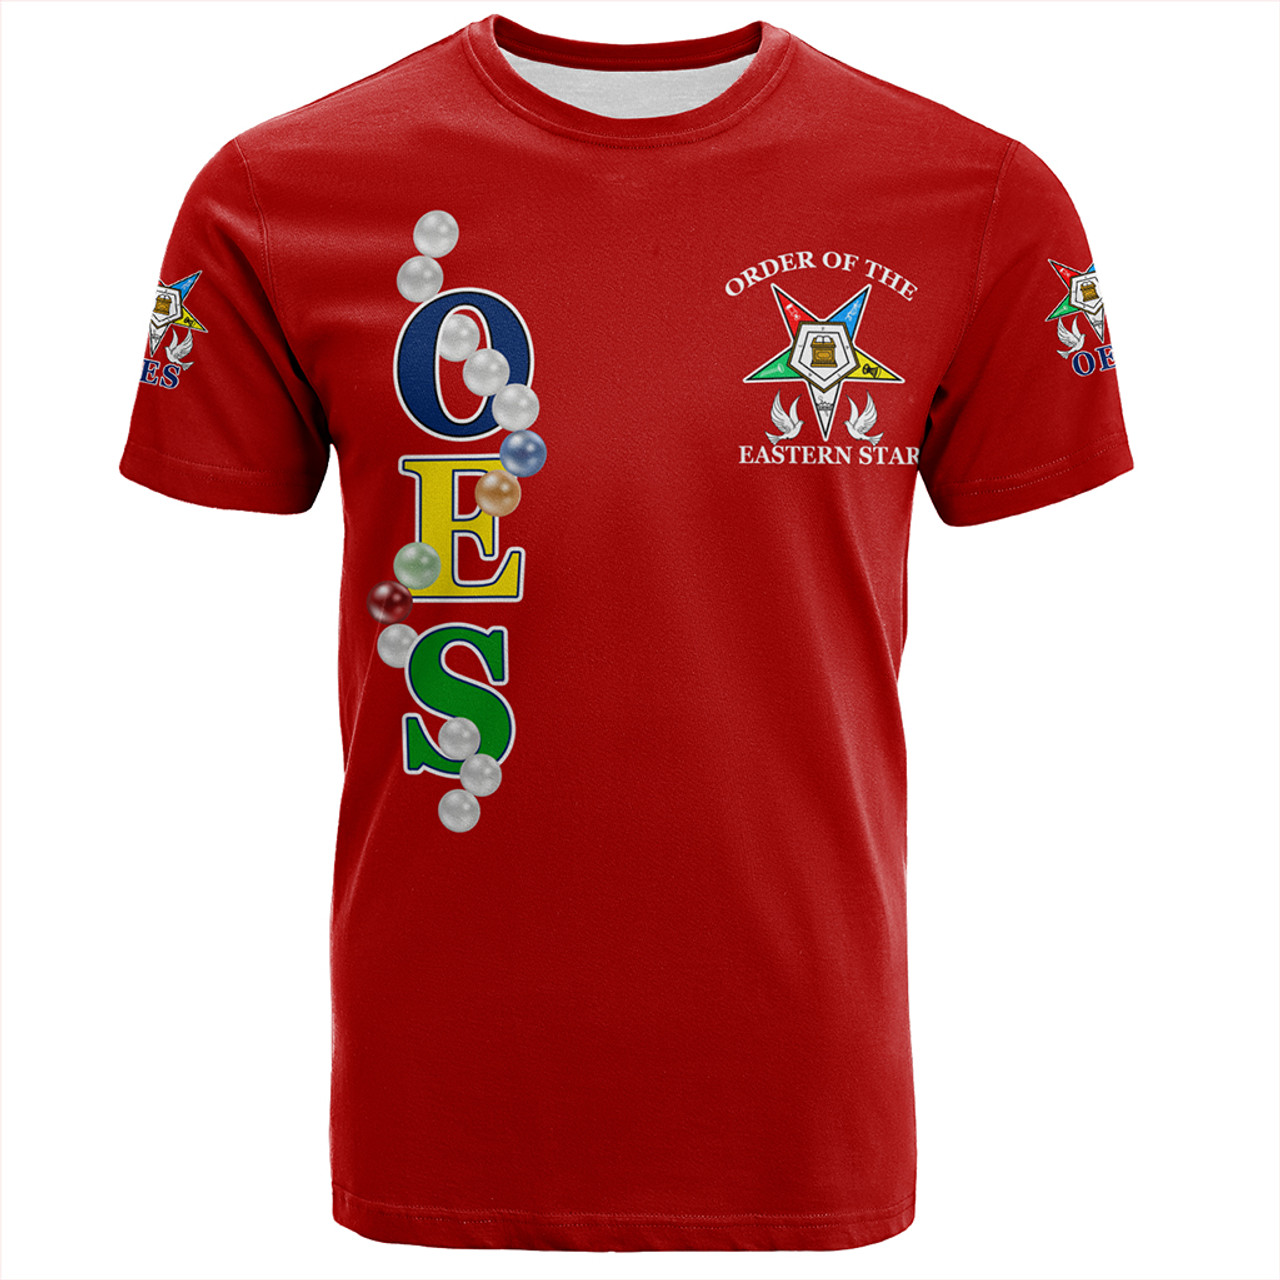 Order of the Eastern Star T-Shirt Pearls Red